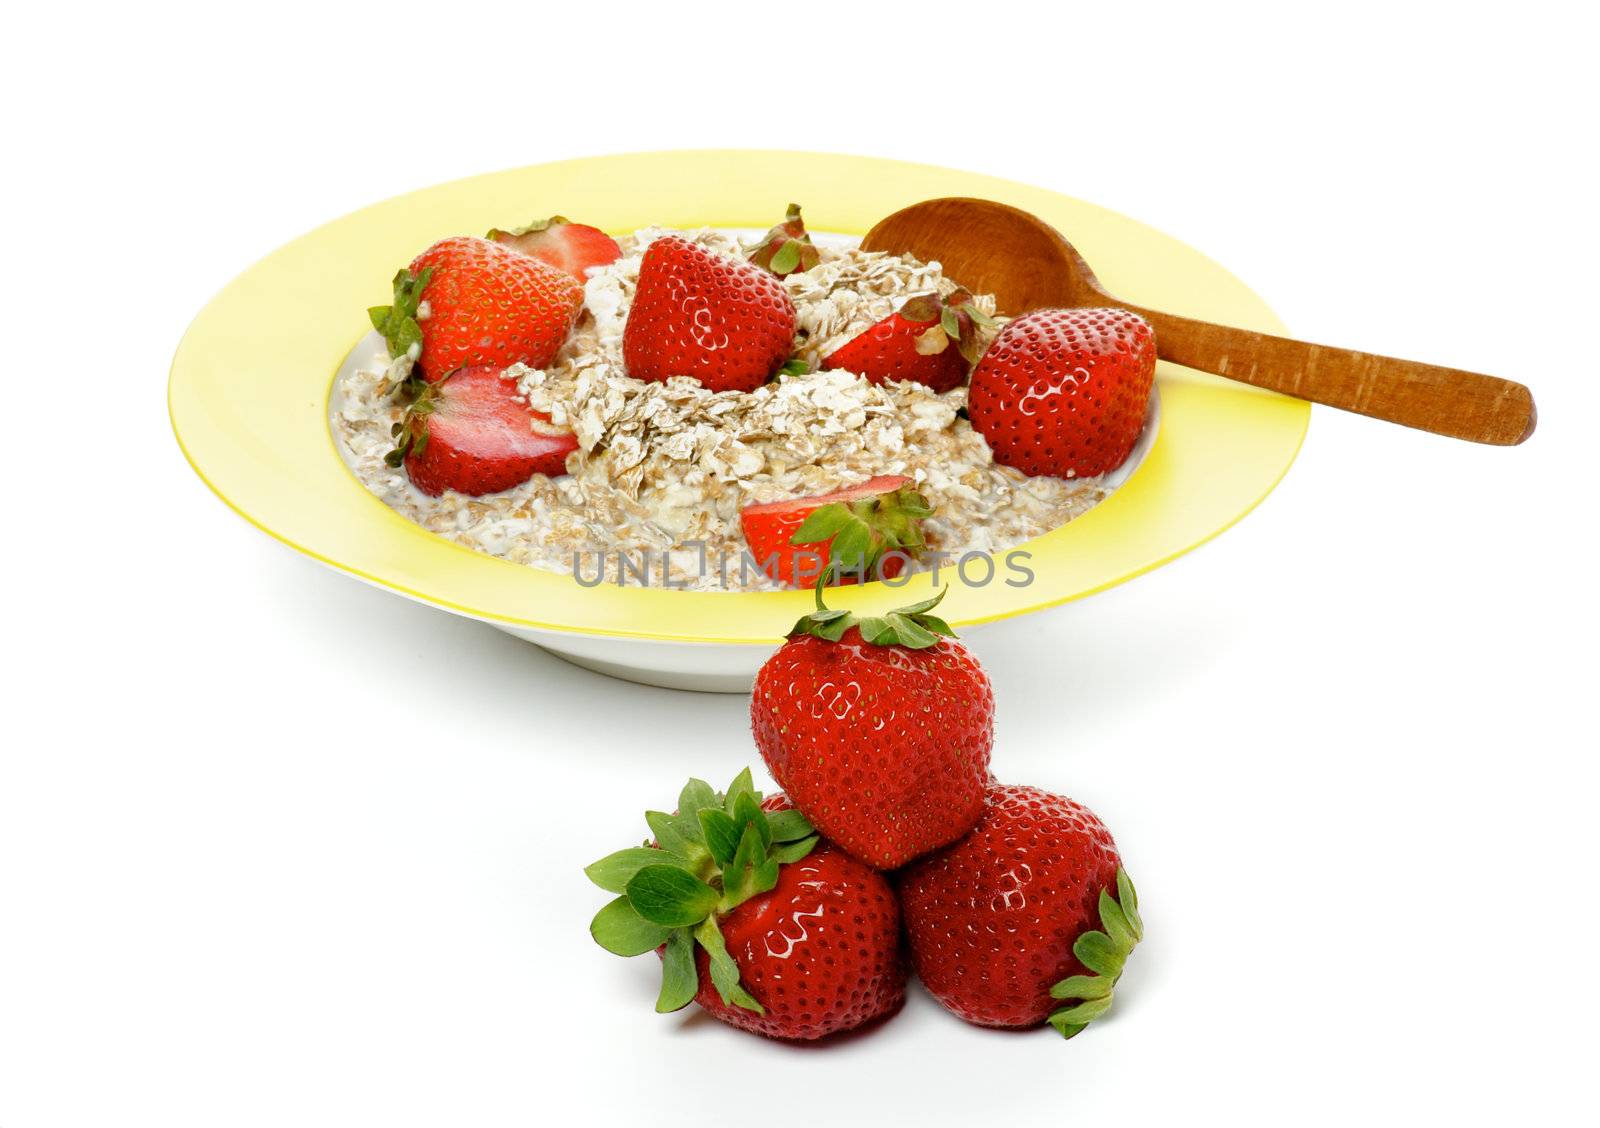 Healthy Muesli, Milk and Fresh Strawberry on Yellow plate with Wooden Spoon isolated on white background